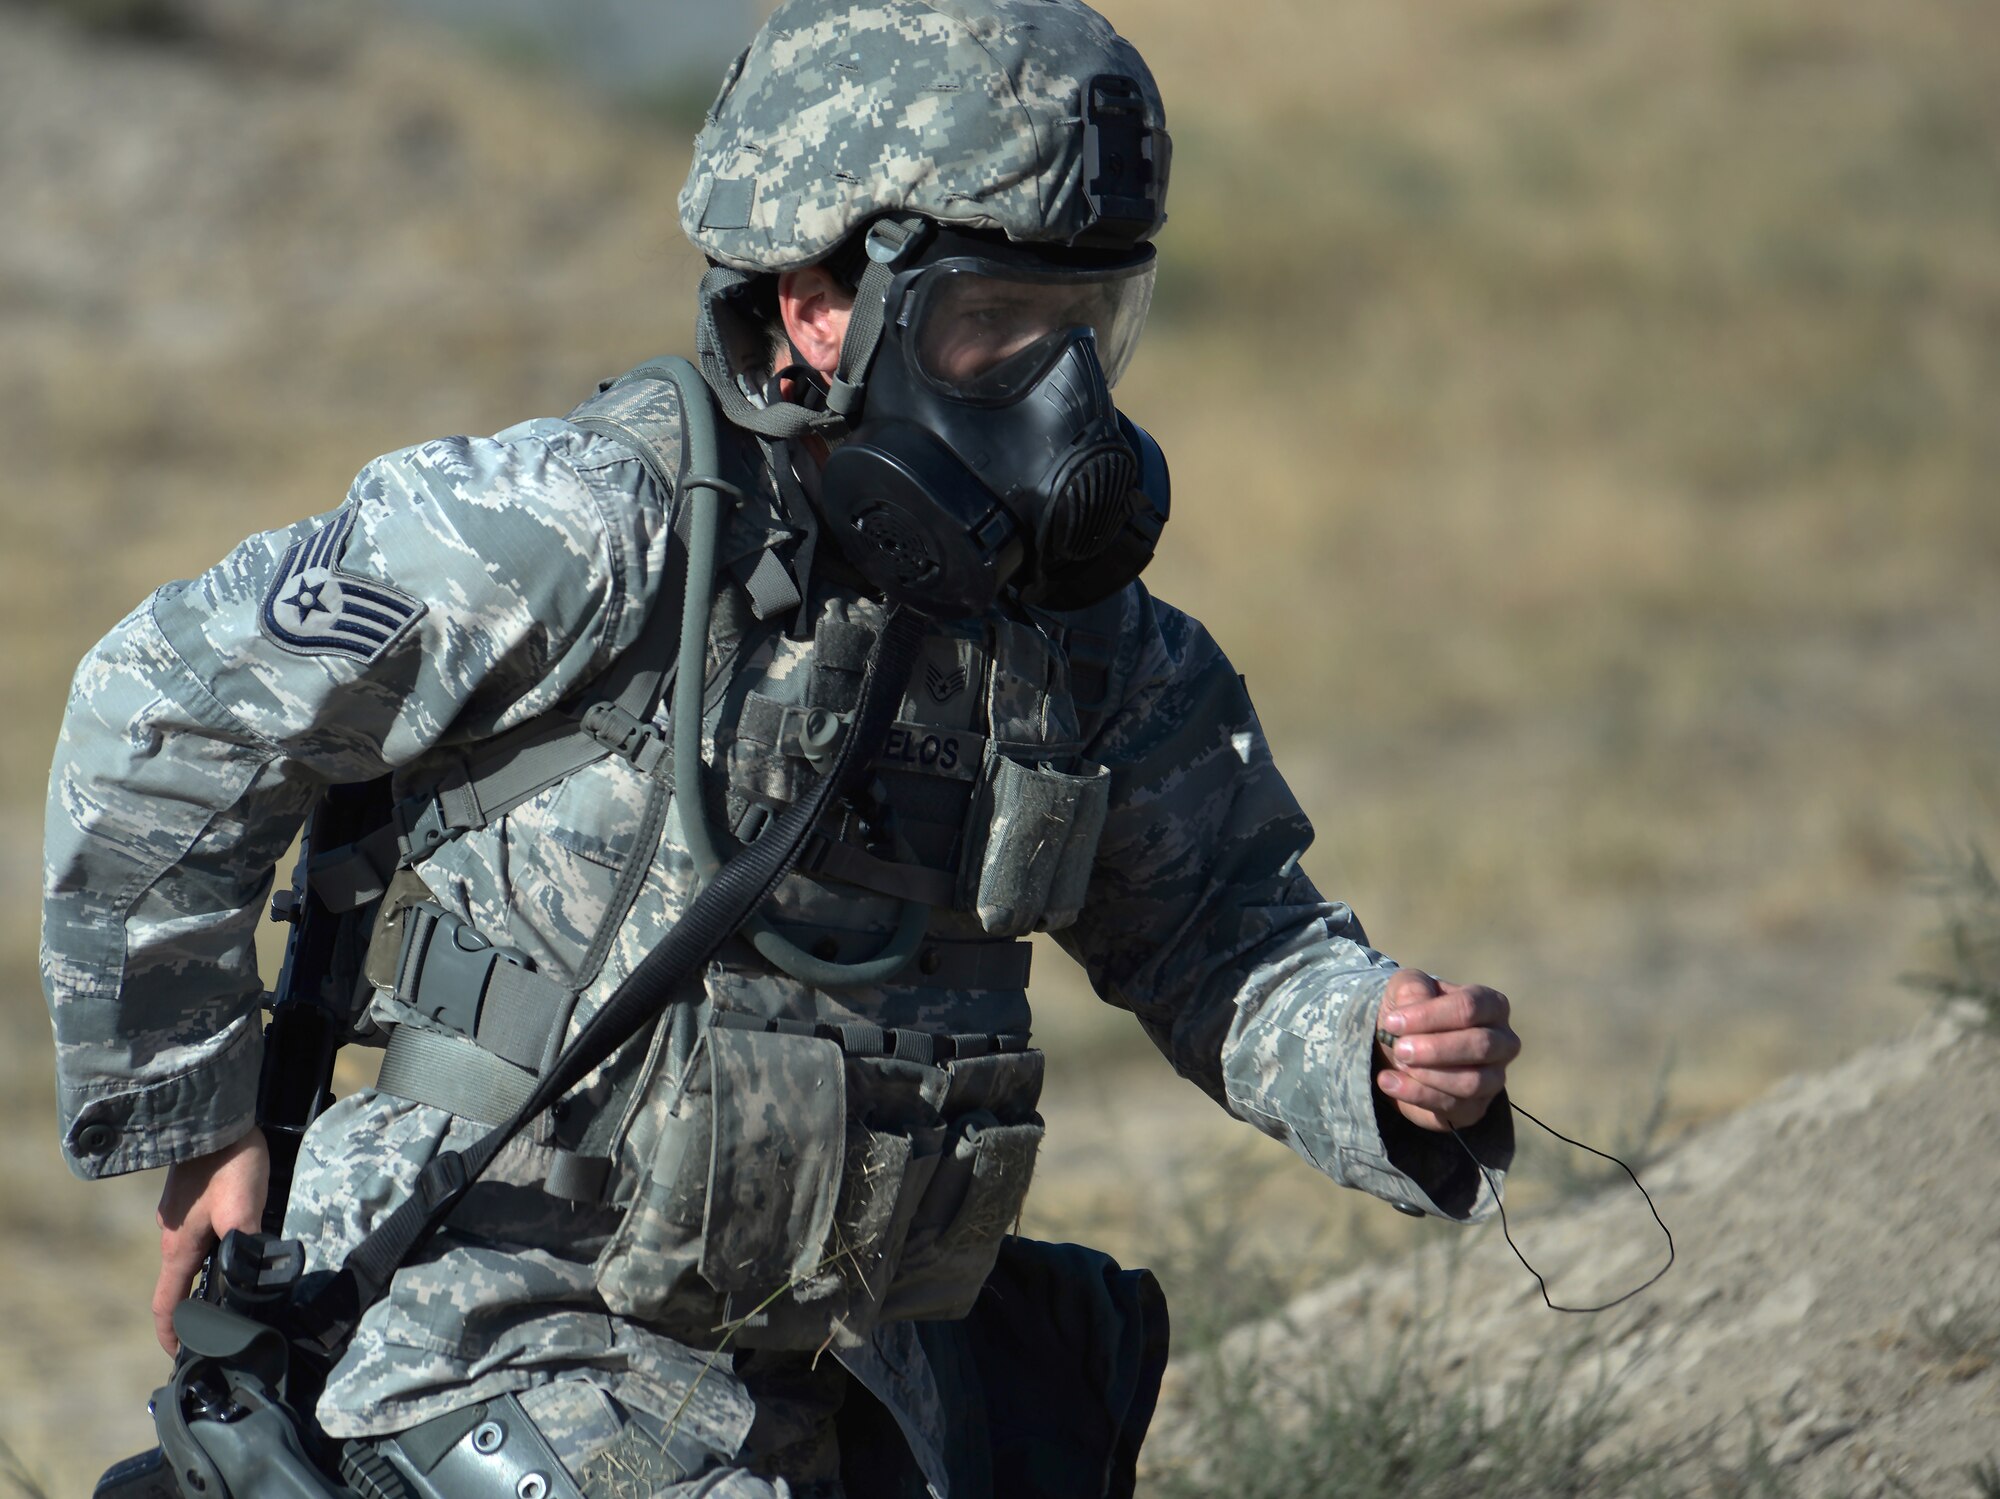 Staff Sgt. Kelly Stamelos, 7th Bomb Wing, Dyess Air Force Base, Texas, runs to the next shooting lane during the 2015 Global Strike Challenge security forces competition Sept. 22, 2015 on Camp Guernsey, Wyo. Ten security forces teams from eight Global Strike Command bases competed to determine which base trains the best of the best security forces. (U.S. Air Force photo by Senior Airman Brandon Valle)